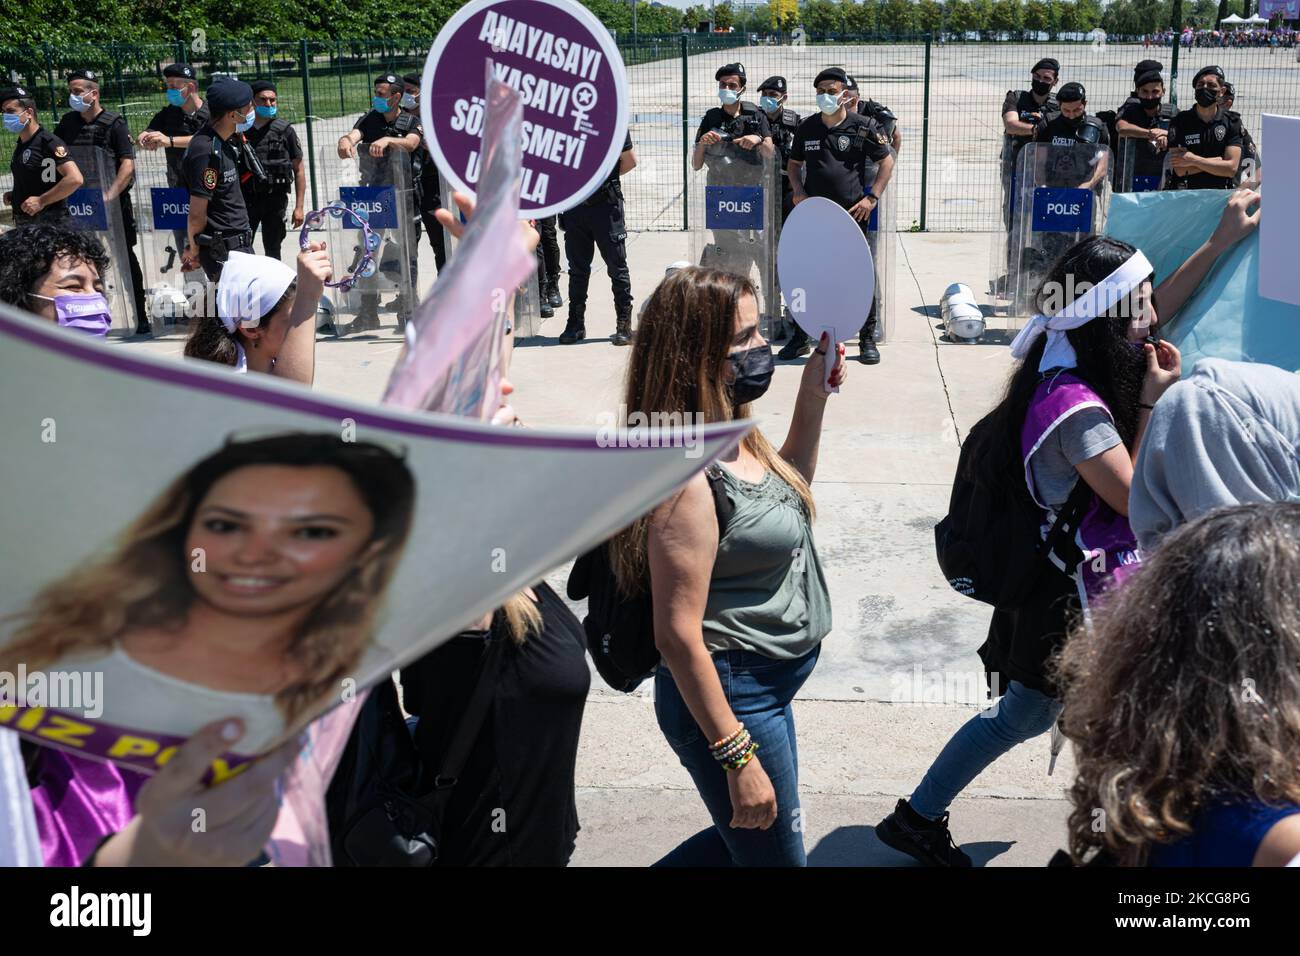 On 19 June, 2021, thousands of Turkish women from different cities gathered in Maltepe, Istanbul, to rally in support of the Istanbul Convention, a European treaty preventing and combating violence against women, from which the Turkish government withdrew in 2021. (Photo by Diego Cupolo/NurPhoto) Stock Photo